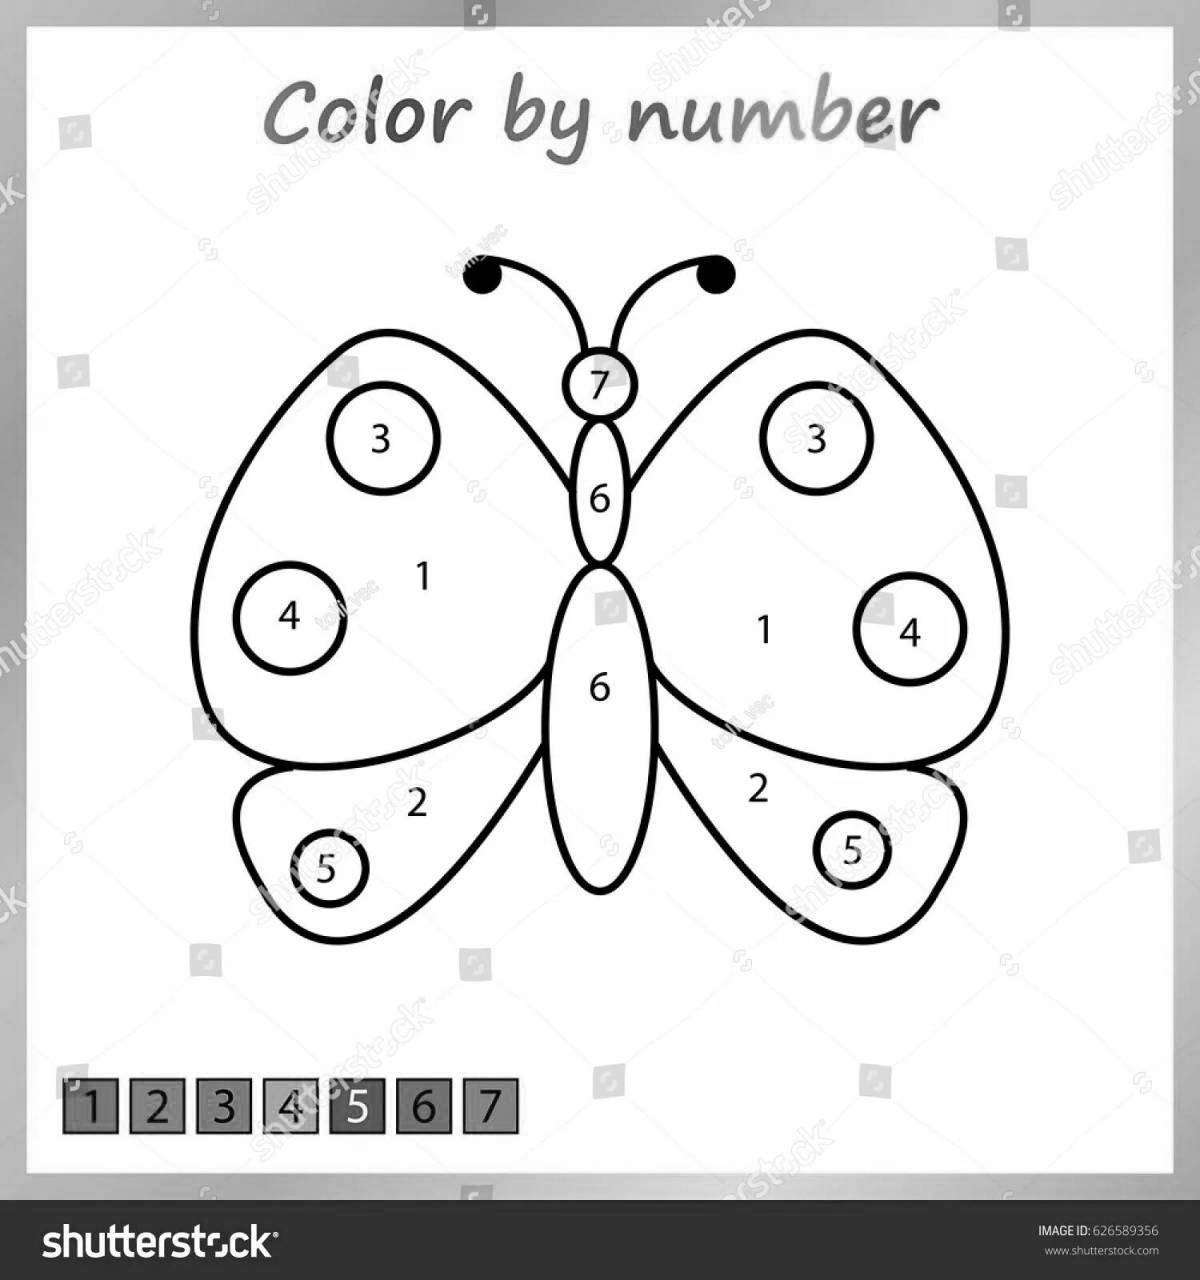 Big Butterfly Color by Number